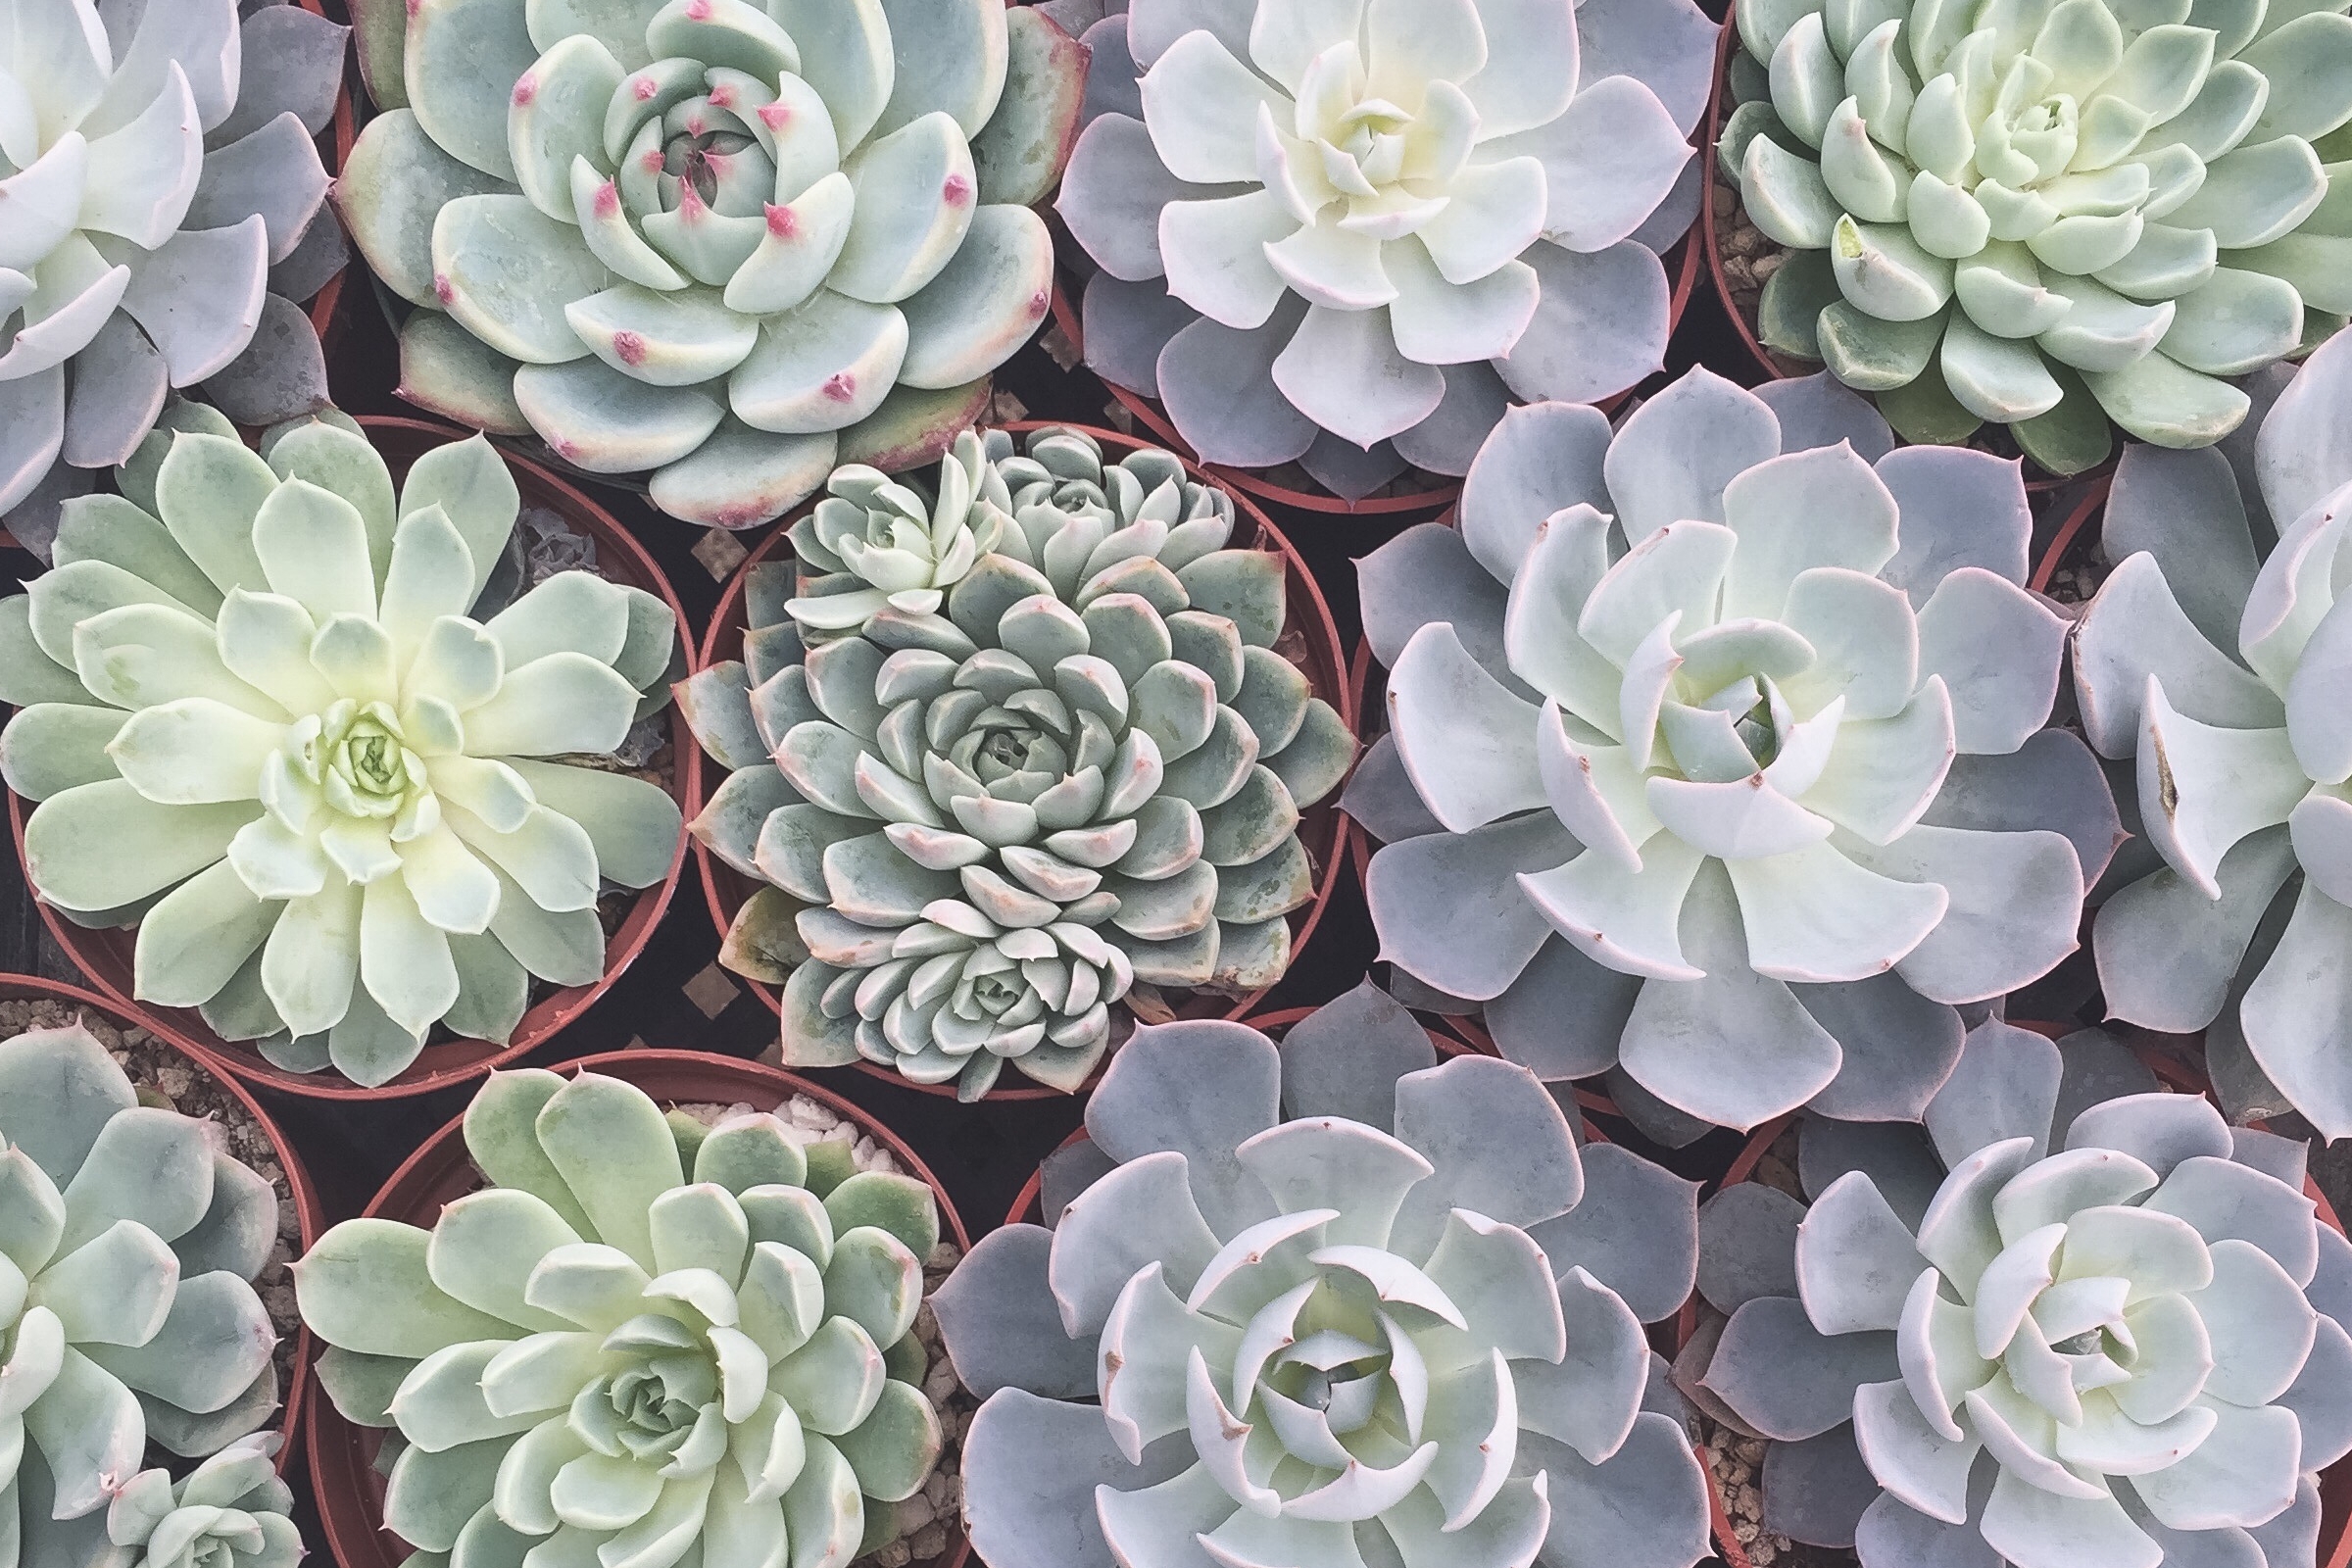 Assorted echeveria succulent photo by Needles + Leaves